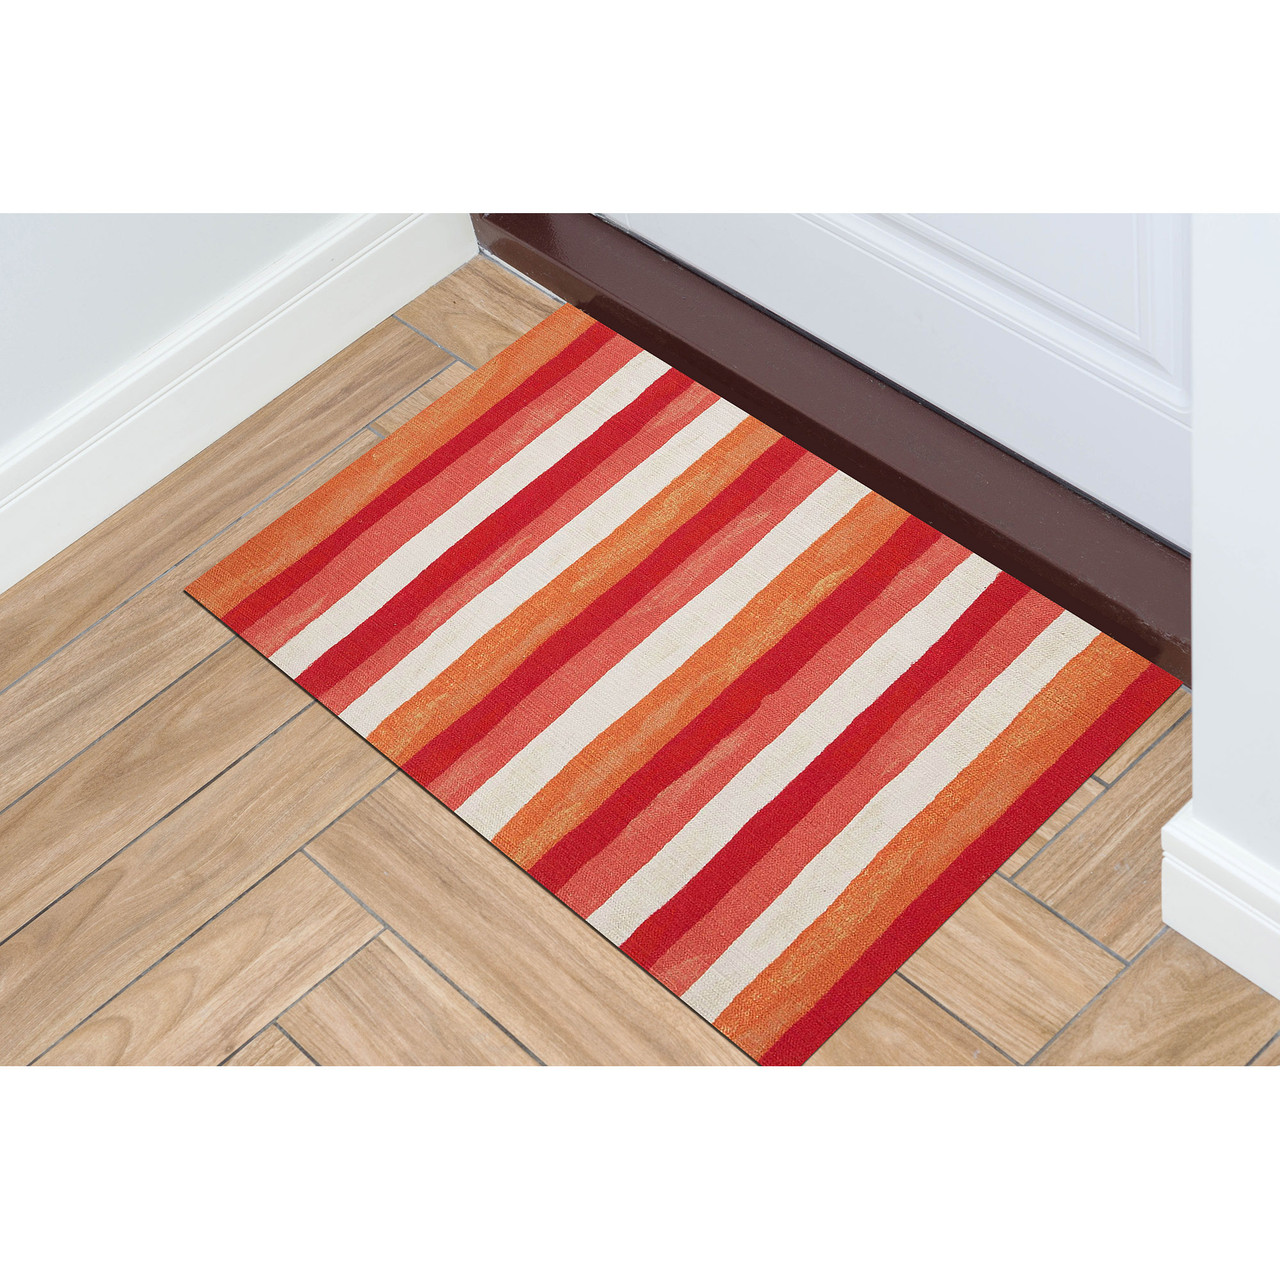 Visions II Painted Stripes Indoor/Outdoor Rug - Warm - 5 Sizes